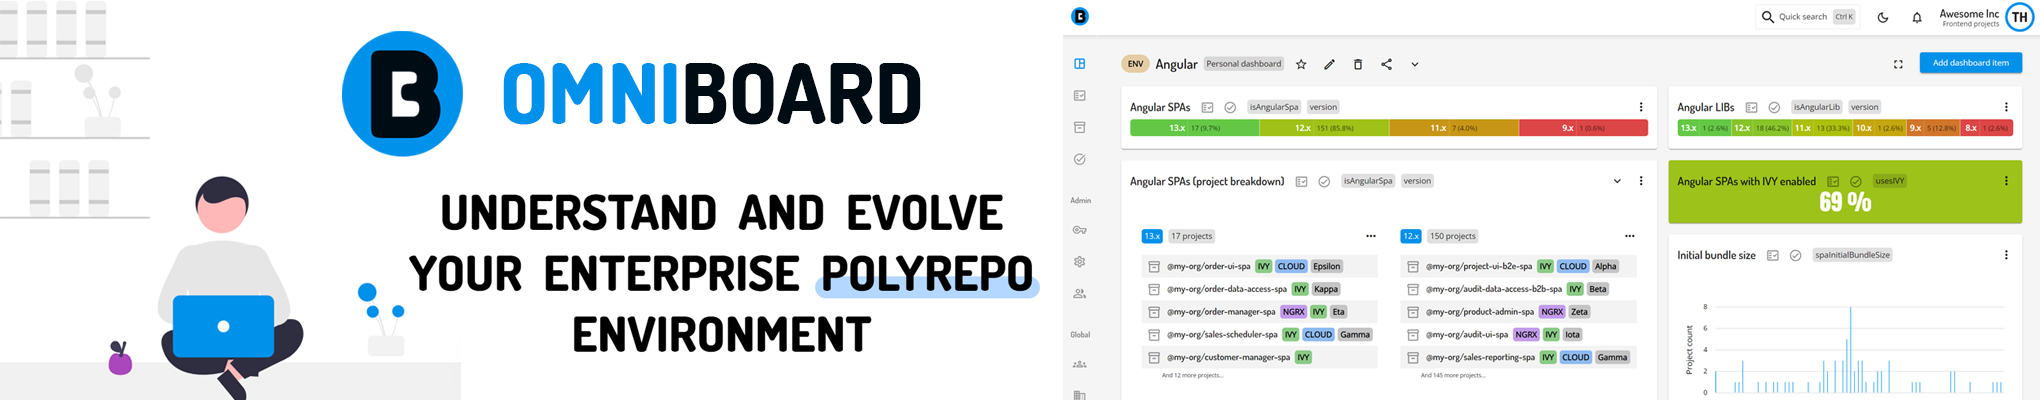 Omniboard - Understand and evolve your enterprise polyrepo environments